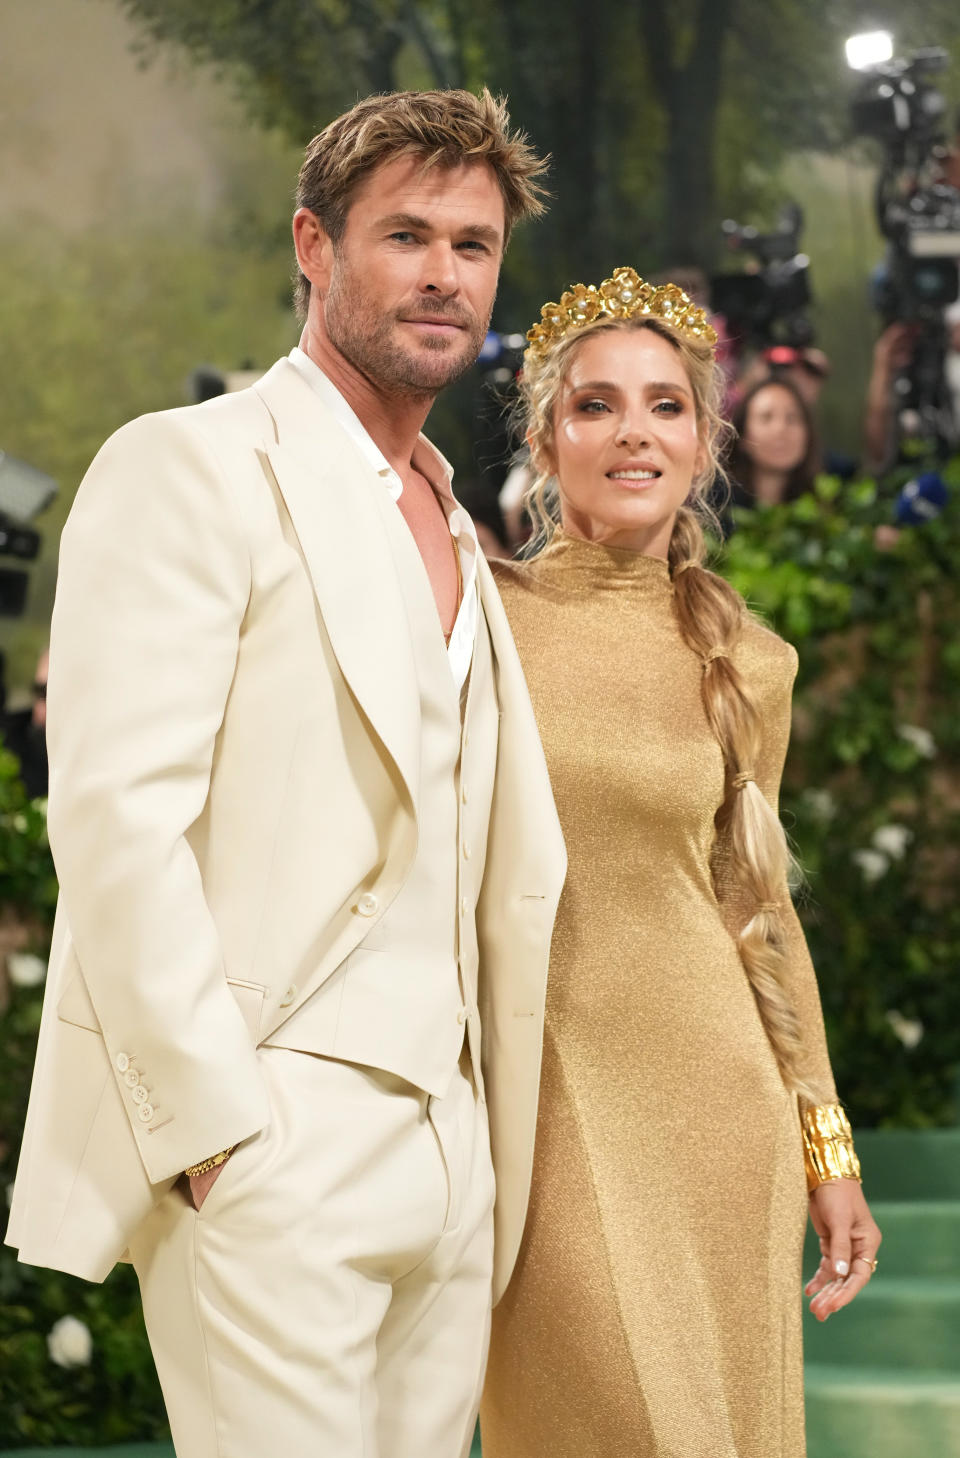 Chris Hemsworth and Elsa Pataky on the red carpet.